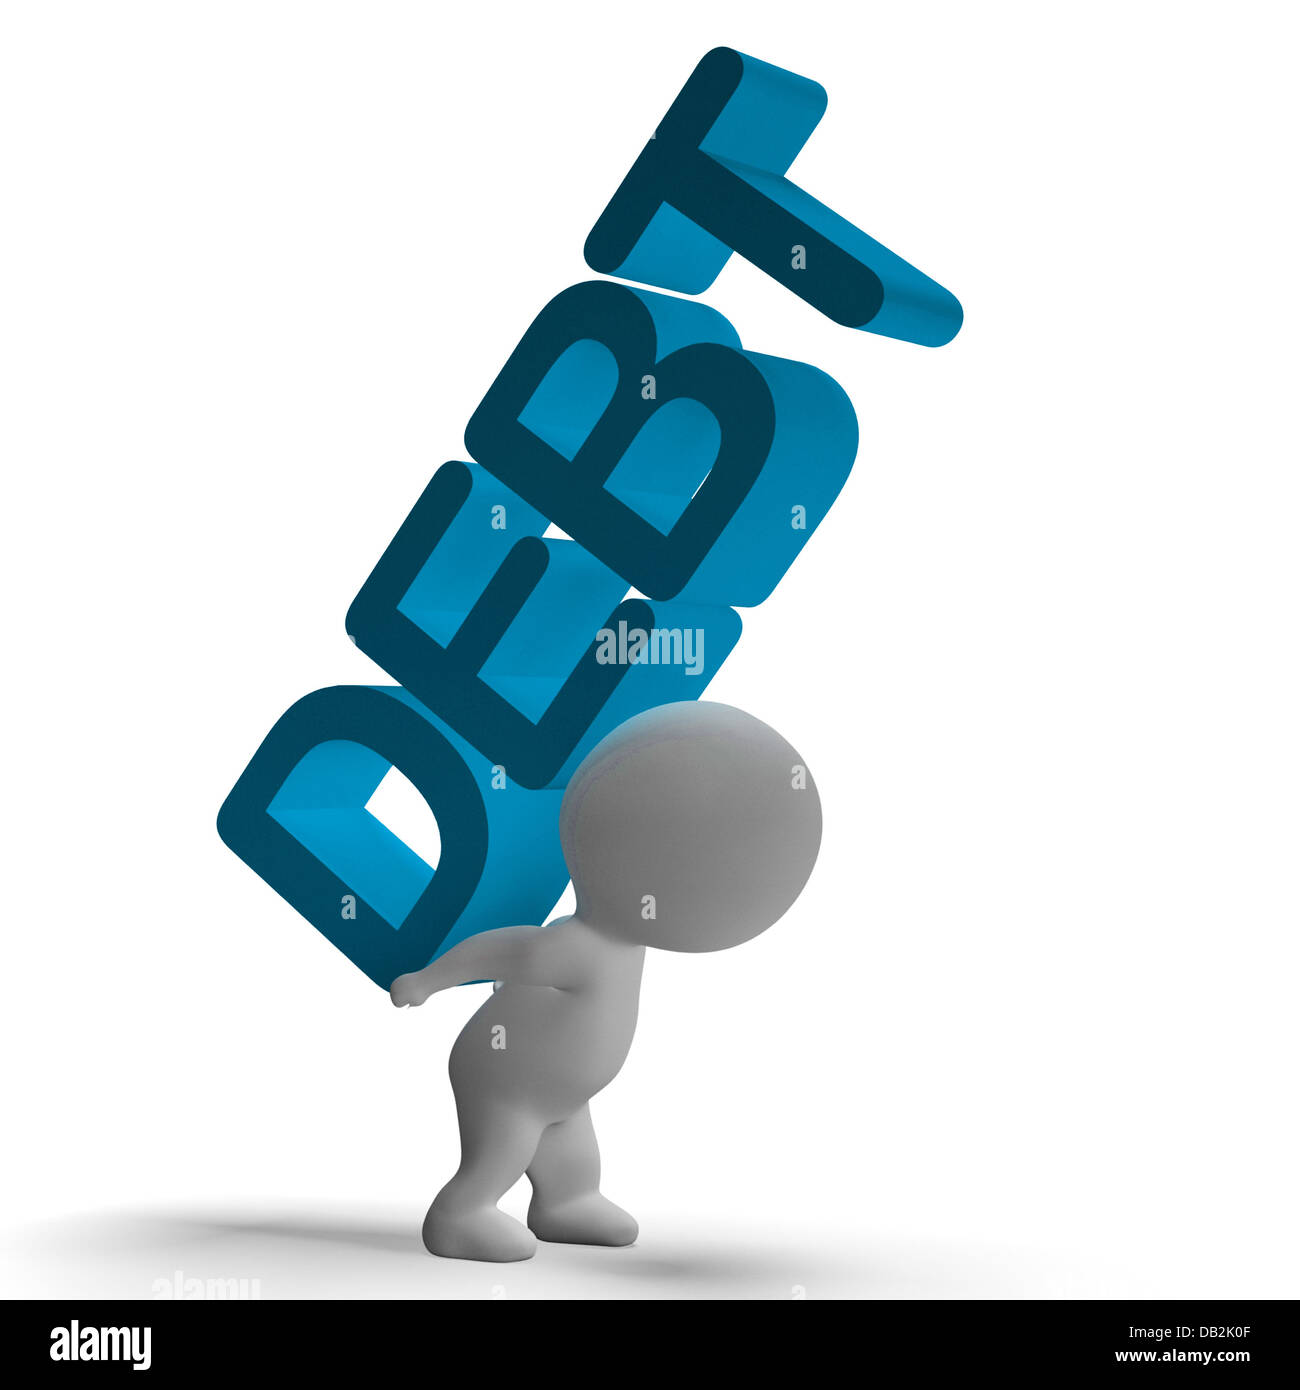 Debt Word And 3d Character Showing Bankruptcy And Poverty Stock Photo